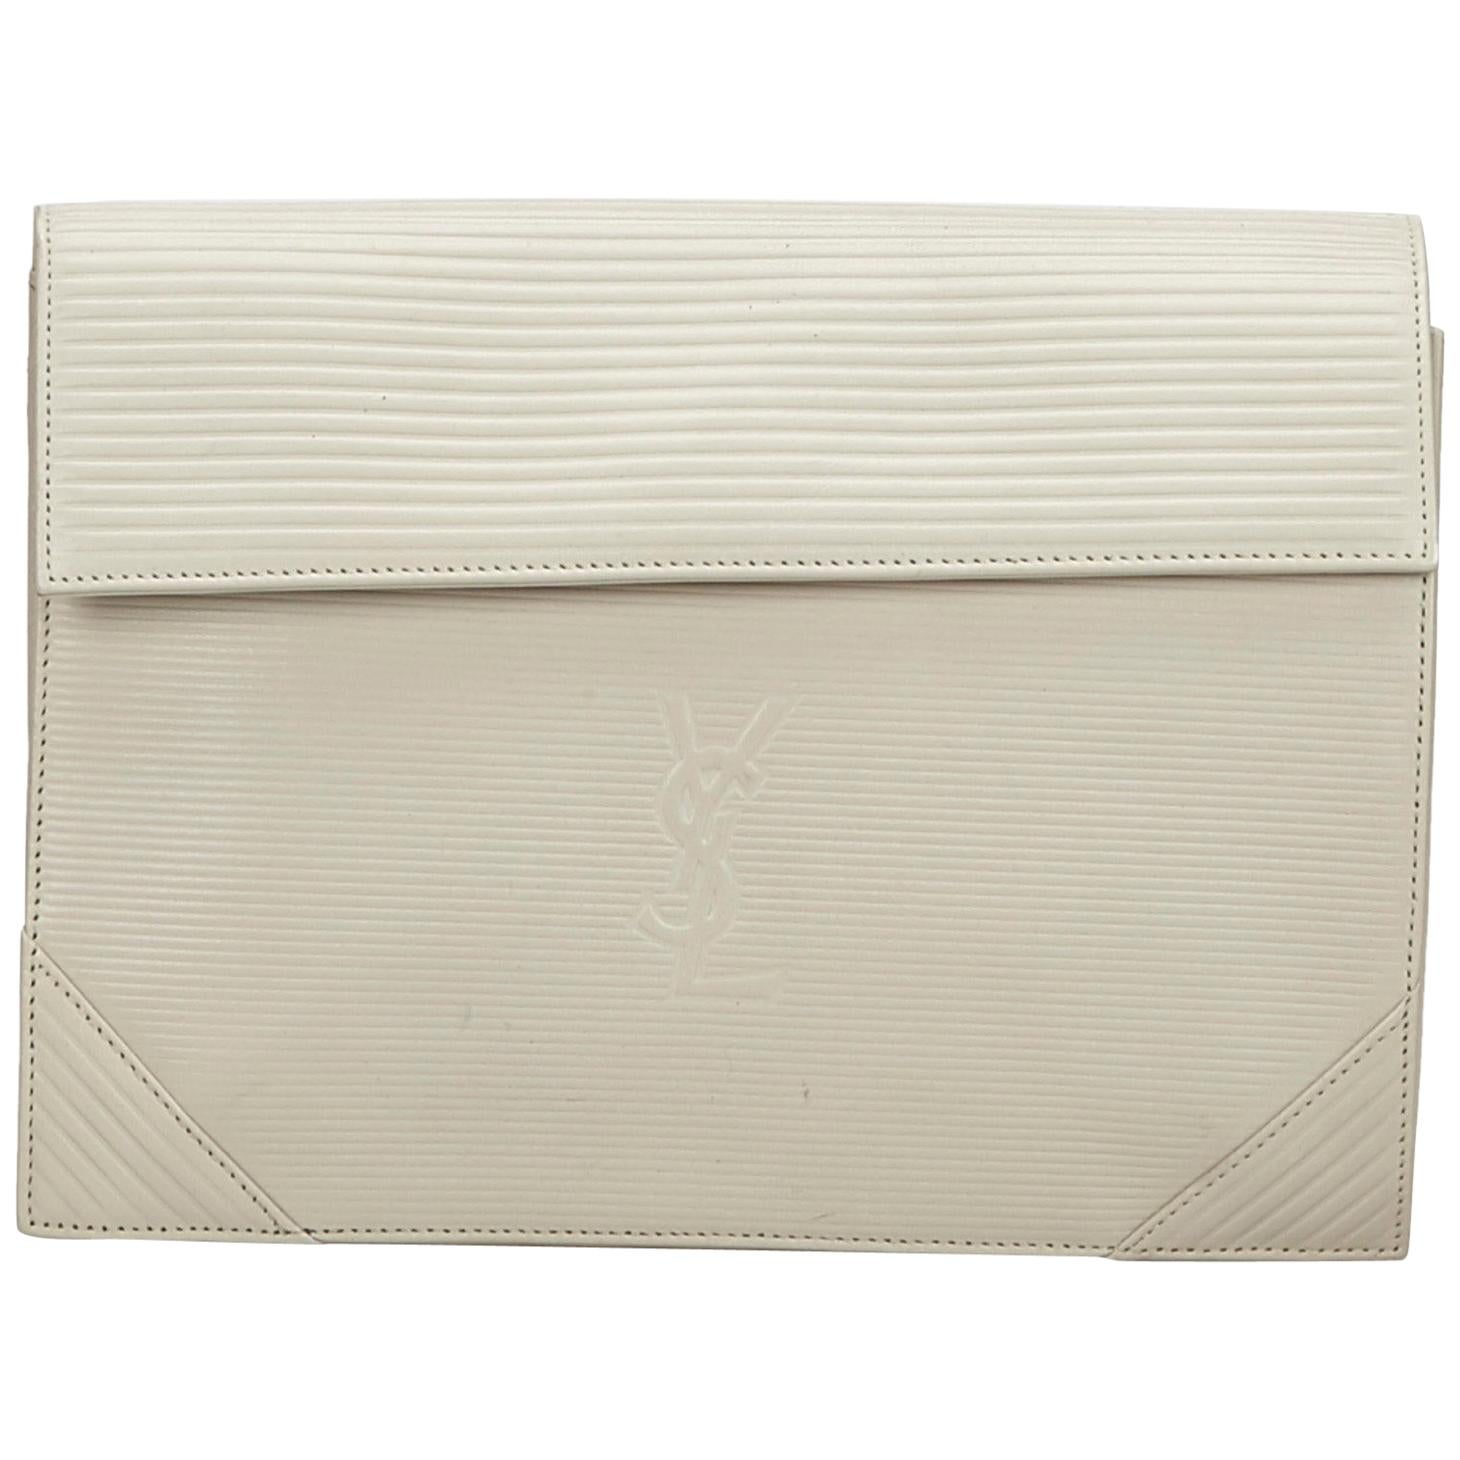 Vintage Authentic YSL White Leather Clutch Bag France SMALL  For Sale